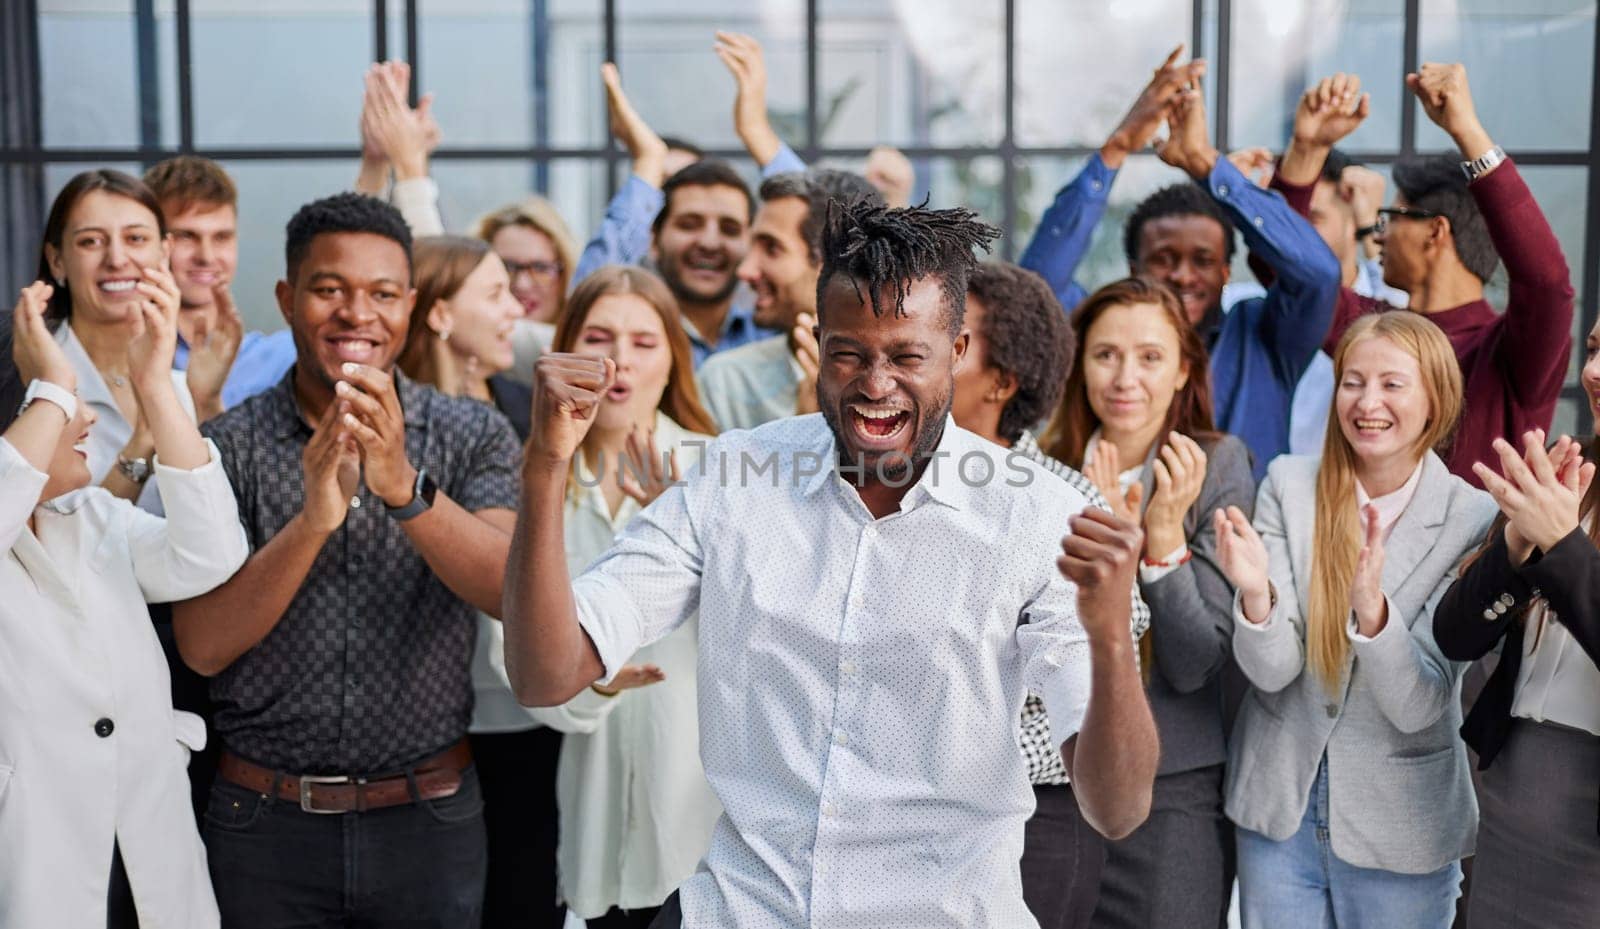 large international group of happy people applauding together standing in the lobby